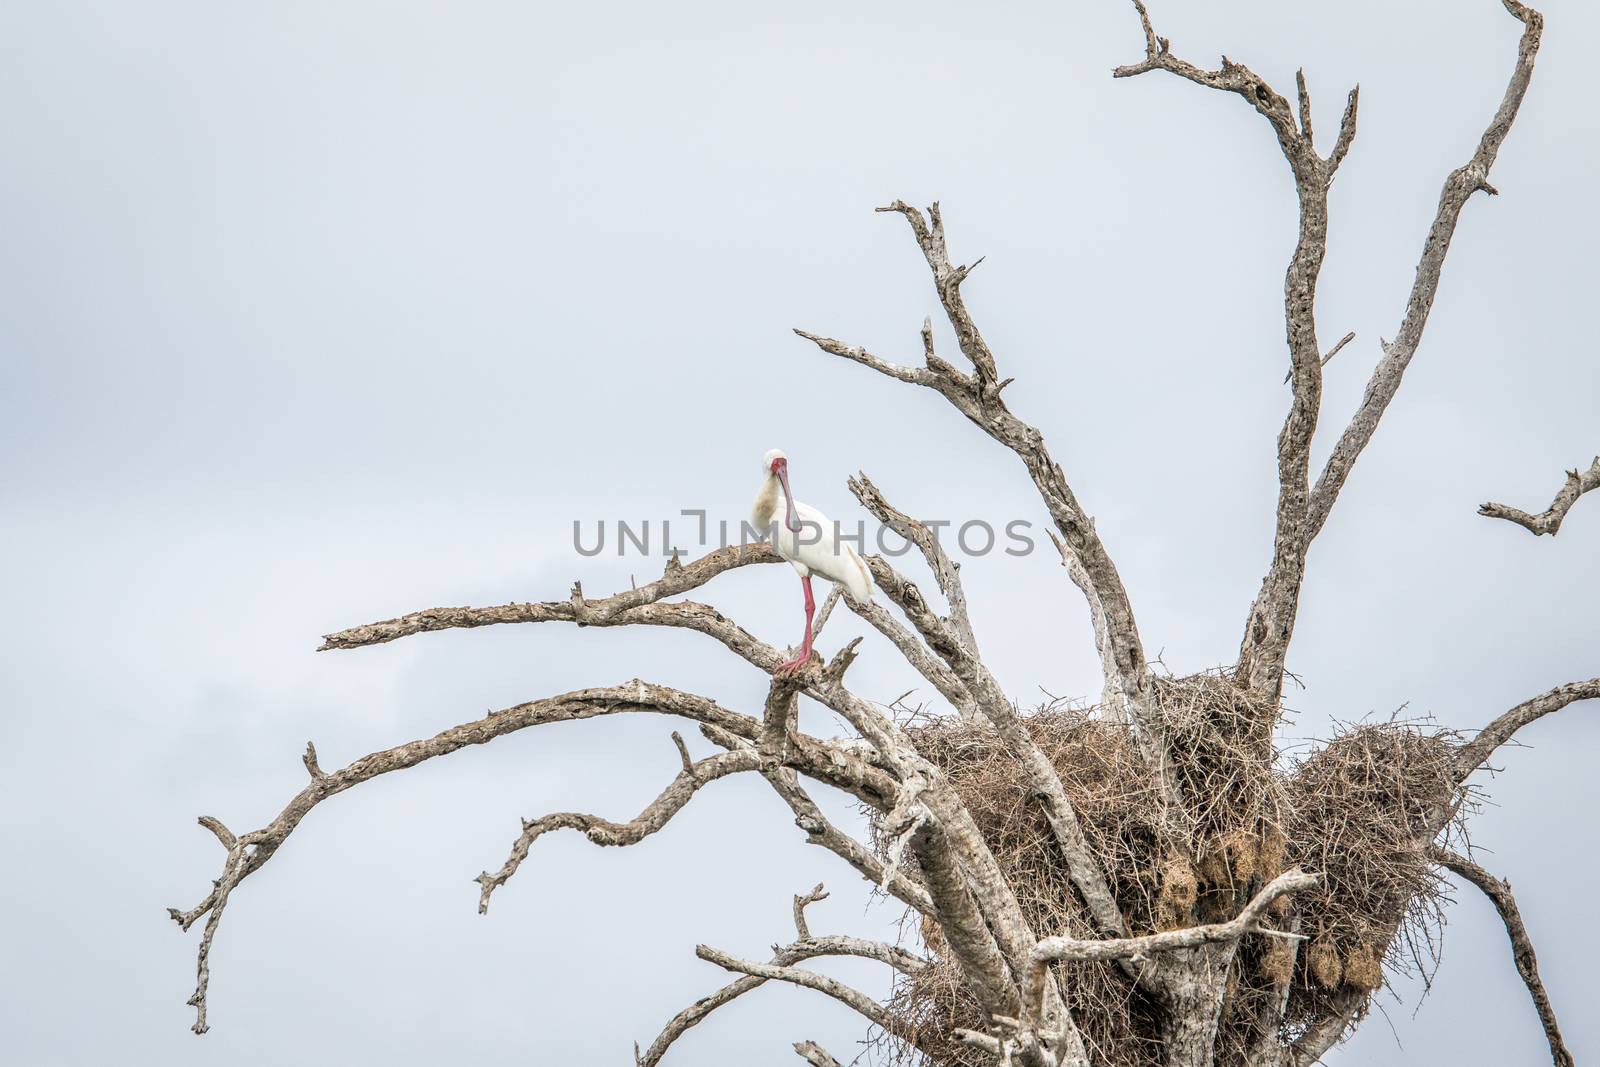 An African spoonbill sitting in a tree in the Kruger National Park. by Simoneemanphotography